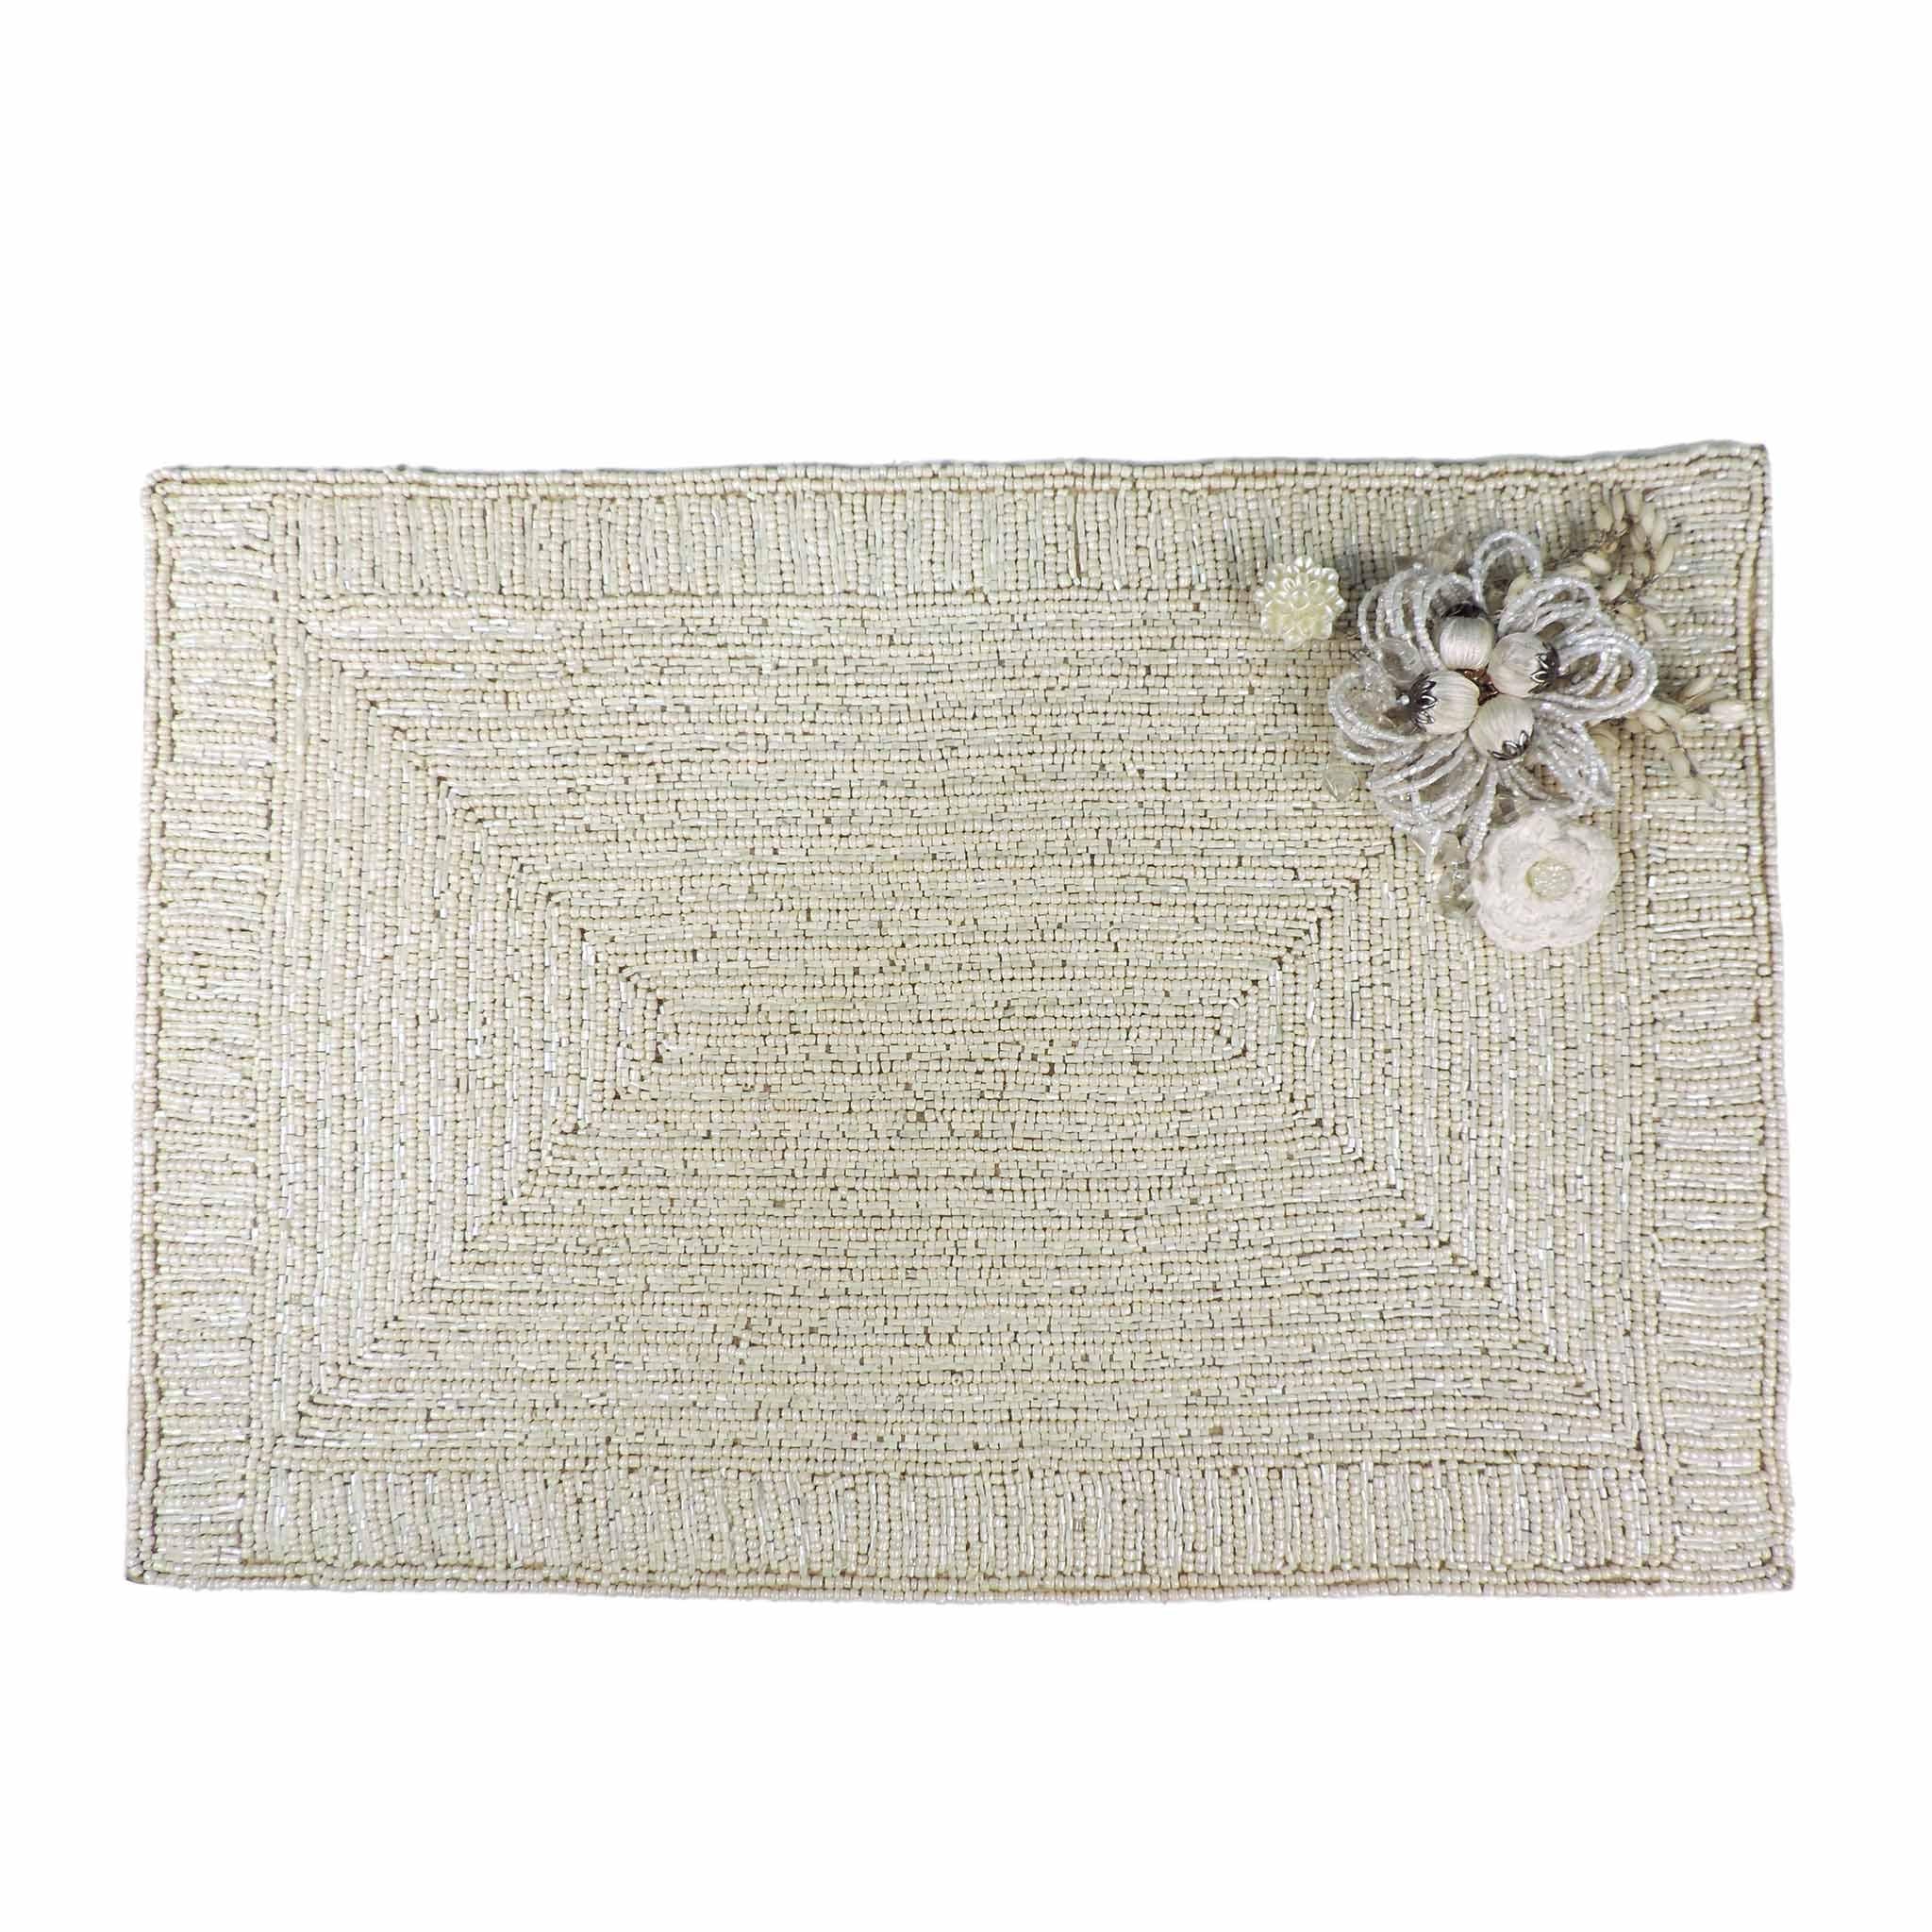 Glass Bead Embroidered Flower Placemat in White, Set of 2